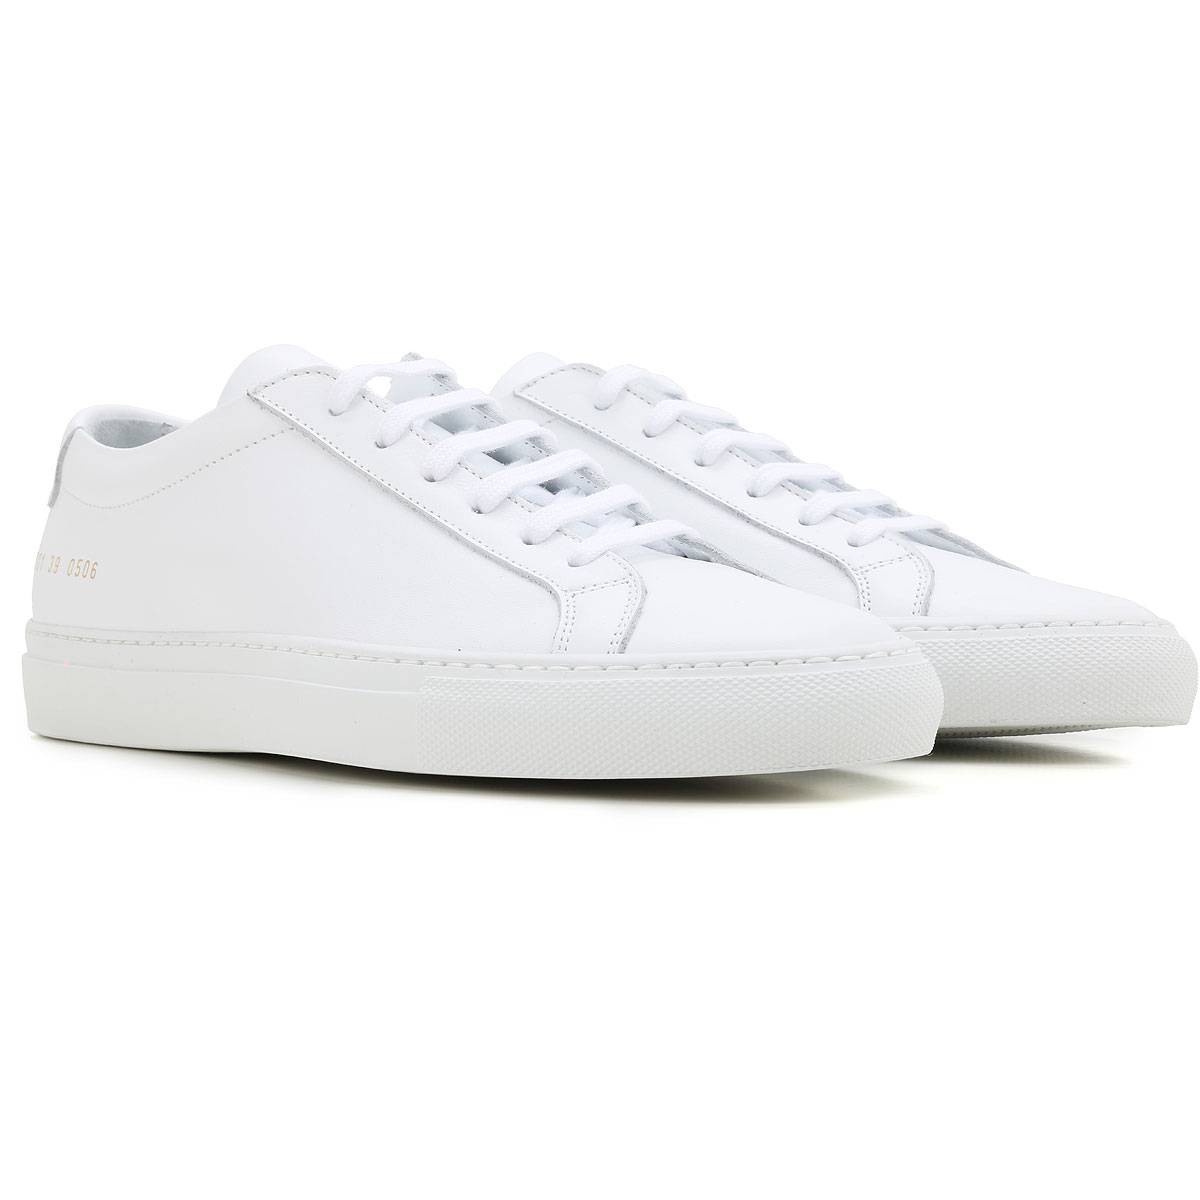 Womens Shoes Woman by Common Projects, Style code: 3701-0506-